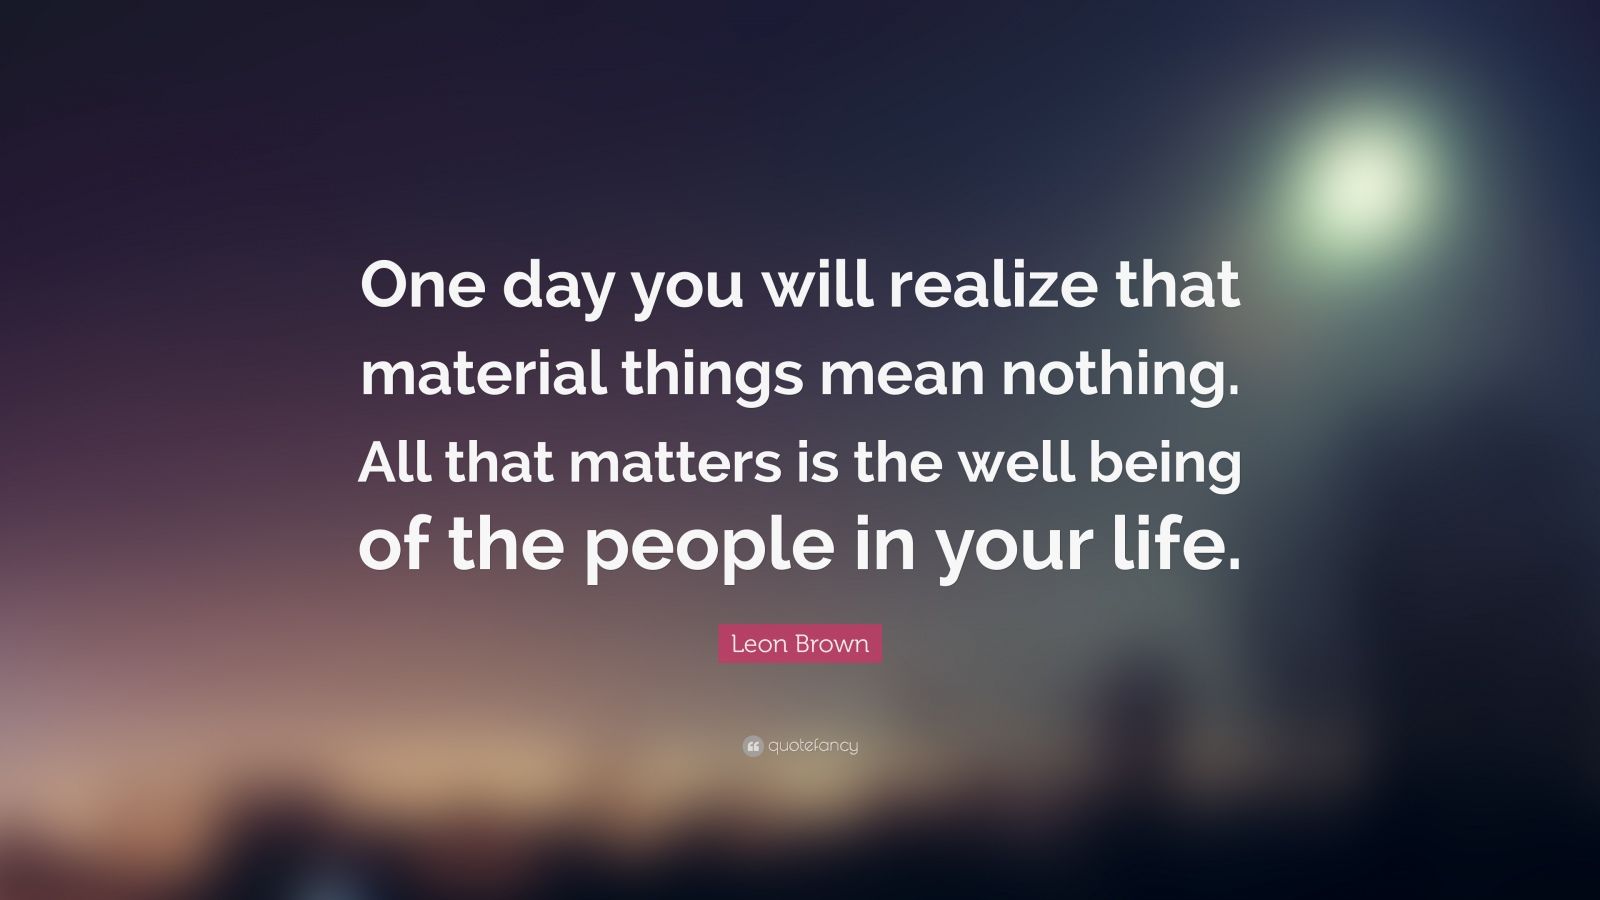 Leon Brown Quote “One day you will realize that material